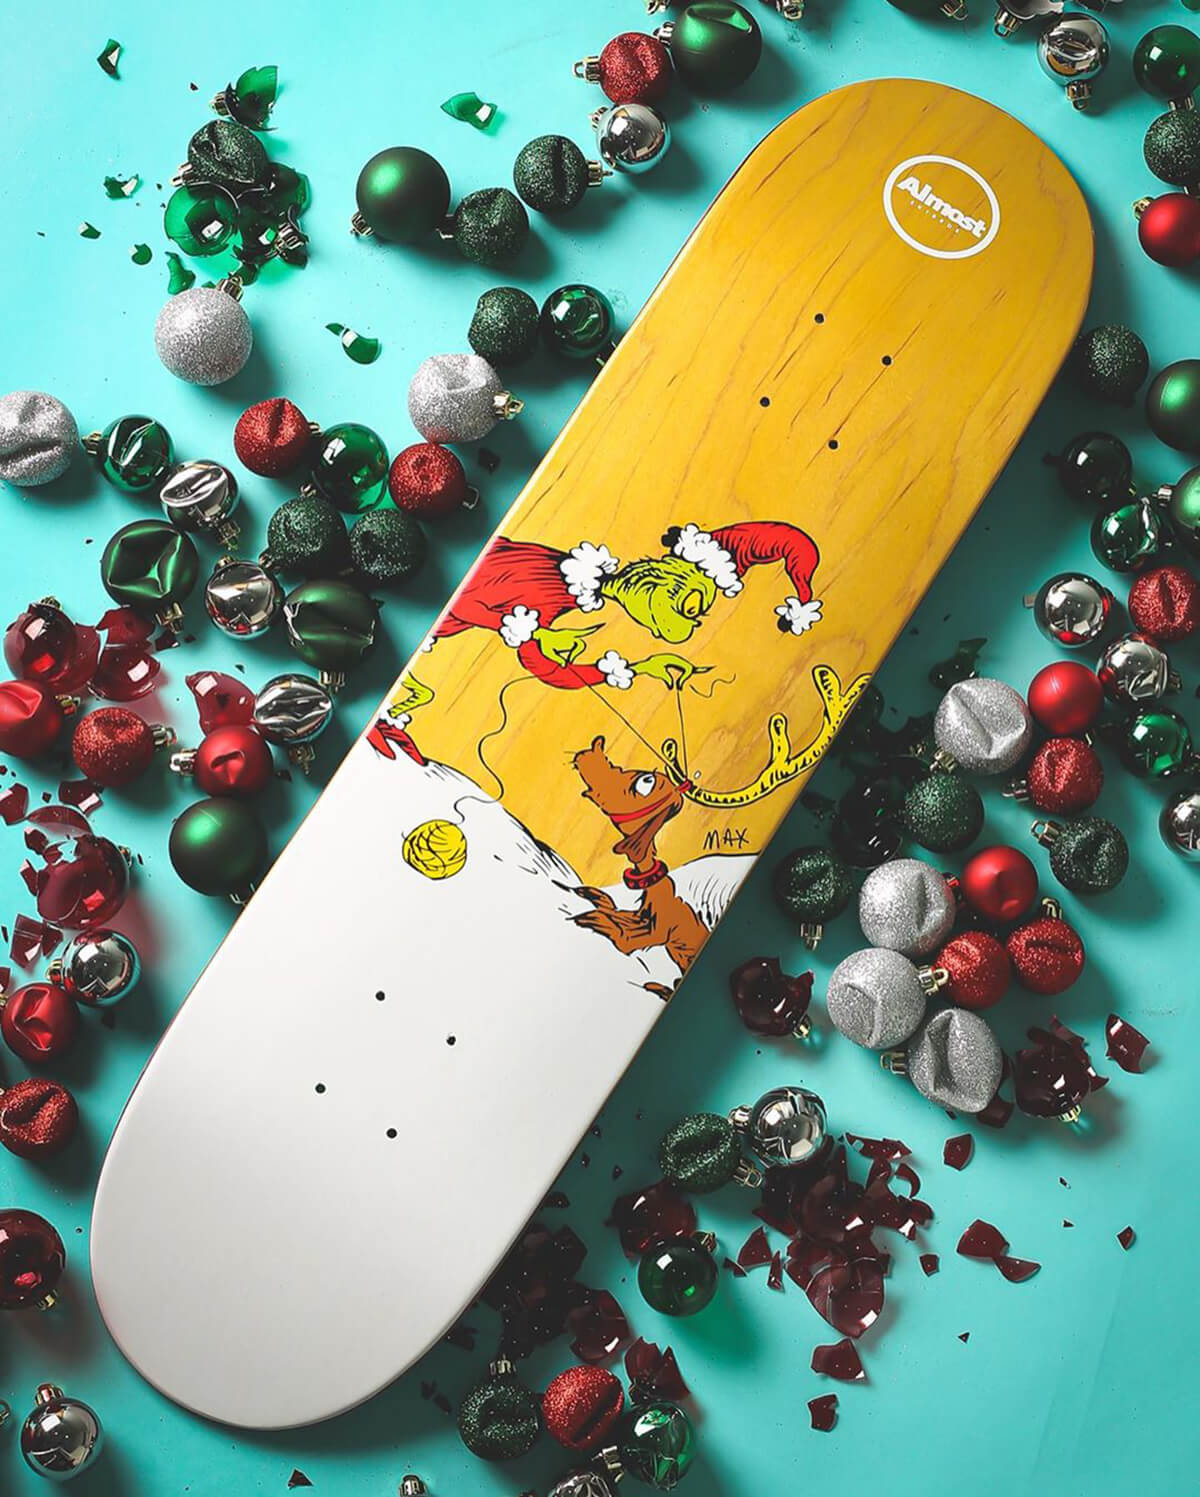 NEW ARRIVAL SKATEBOARDS FROM ALMOST & MORE - SHOP NEW SKATEBOARDS